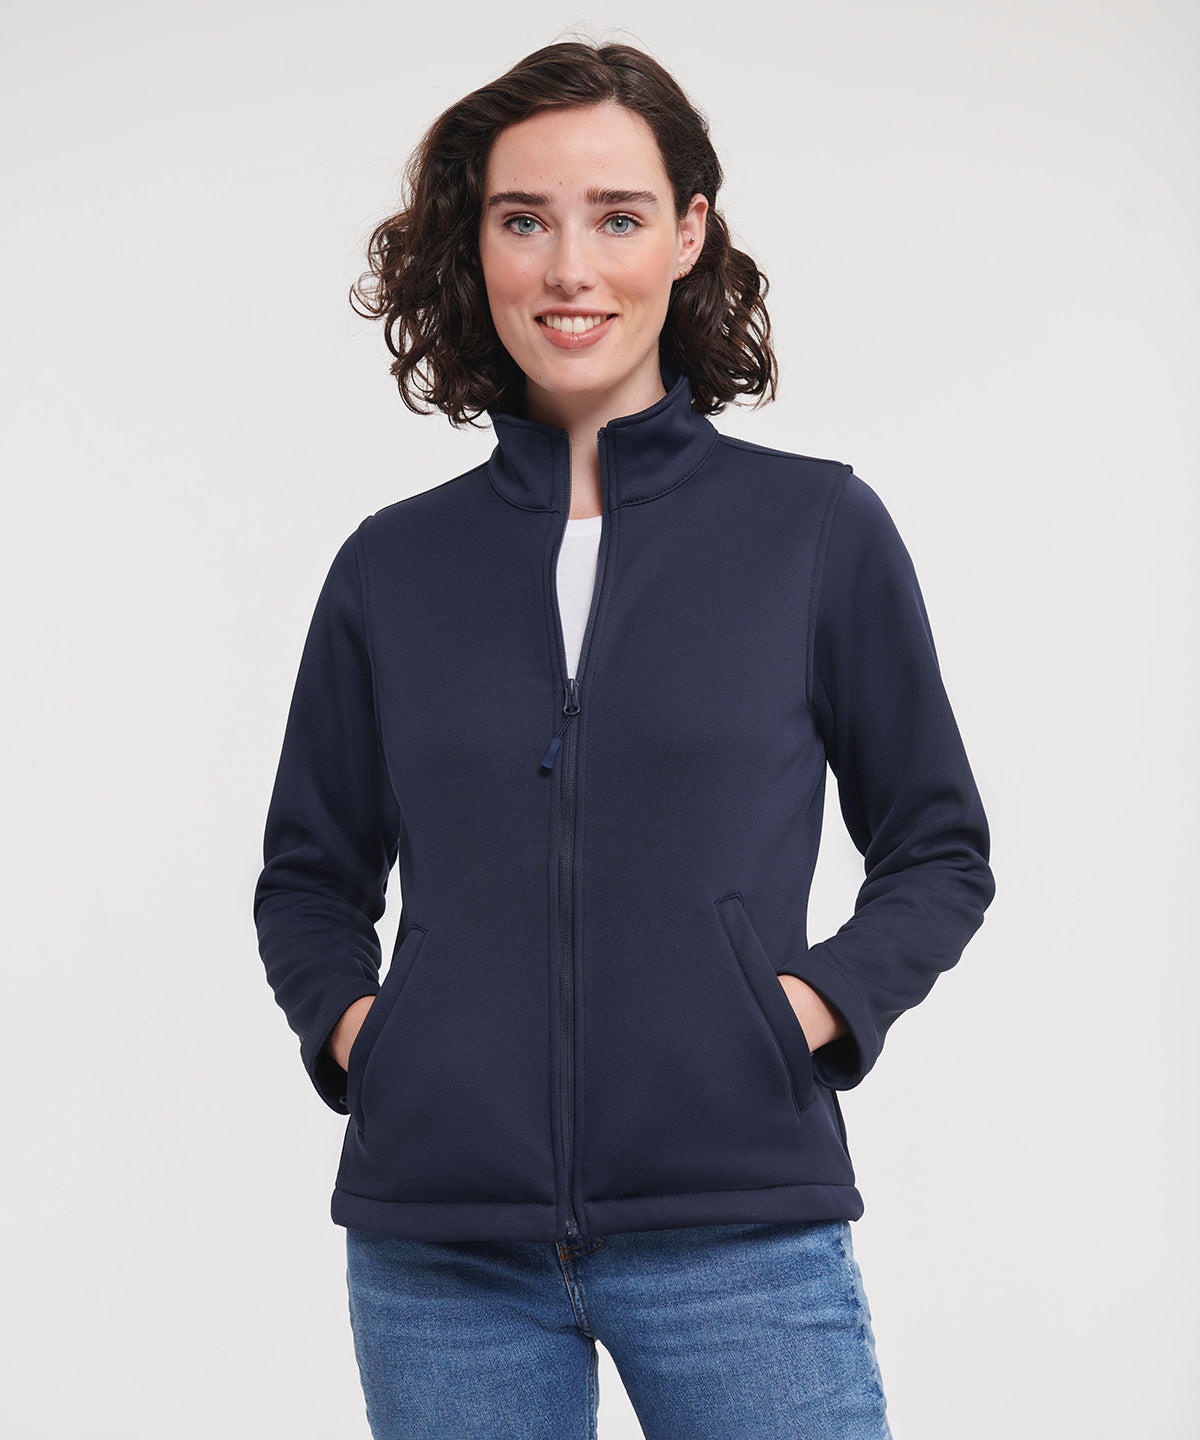 Lady is wearing Russell Ladies Smart Softshell Jacket